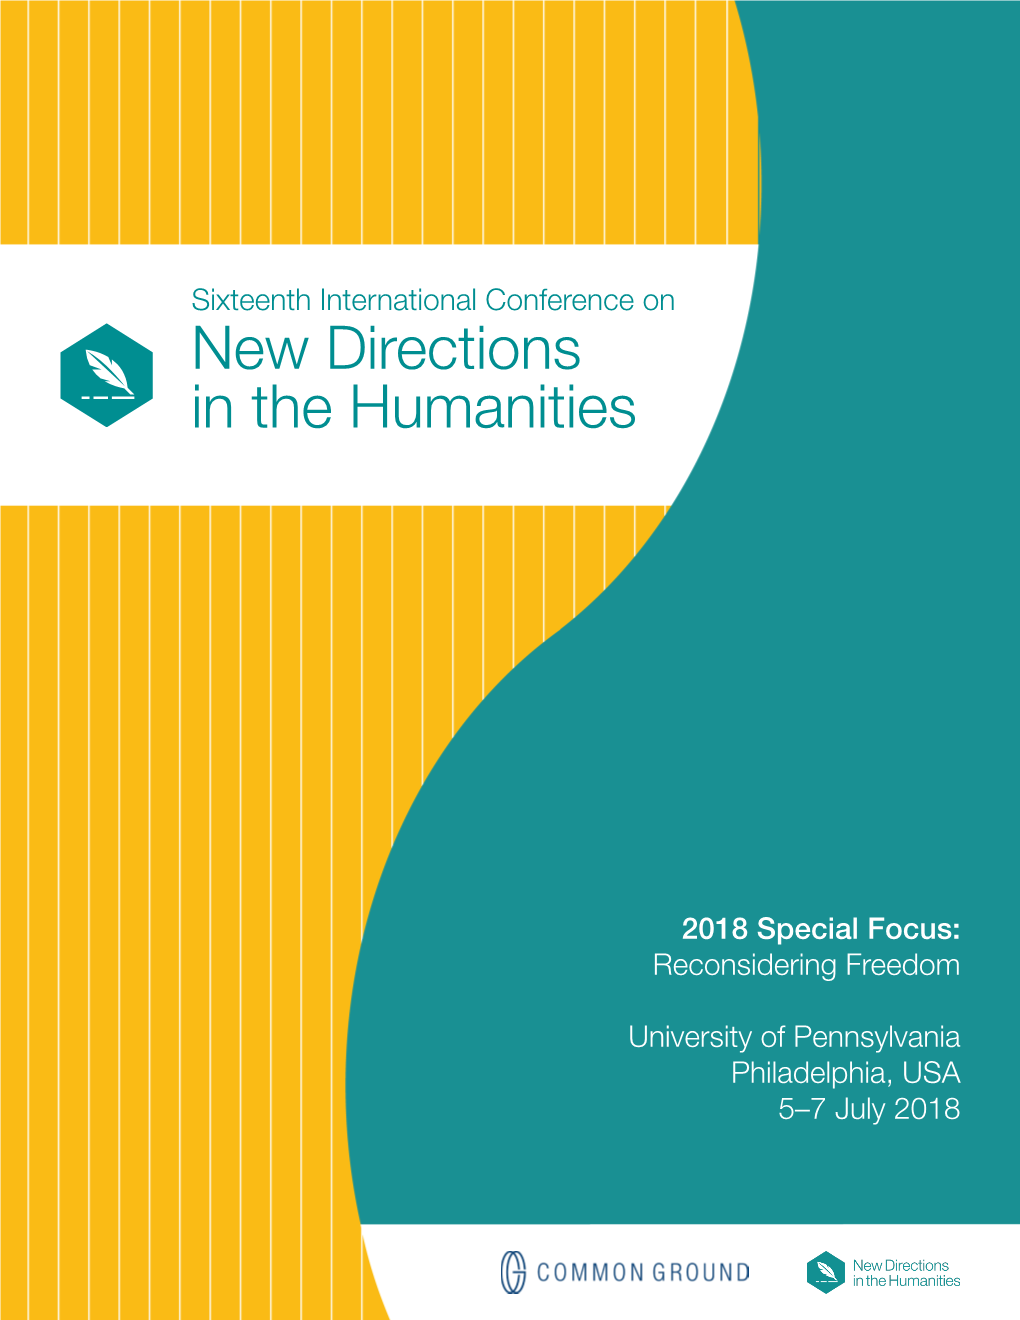 New Directions in the Humanities